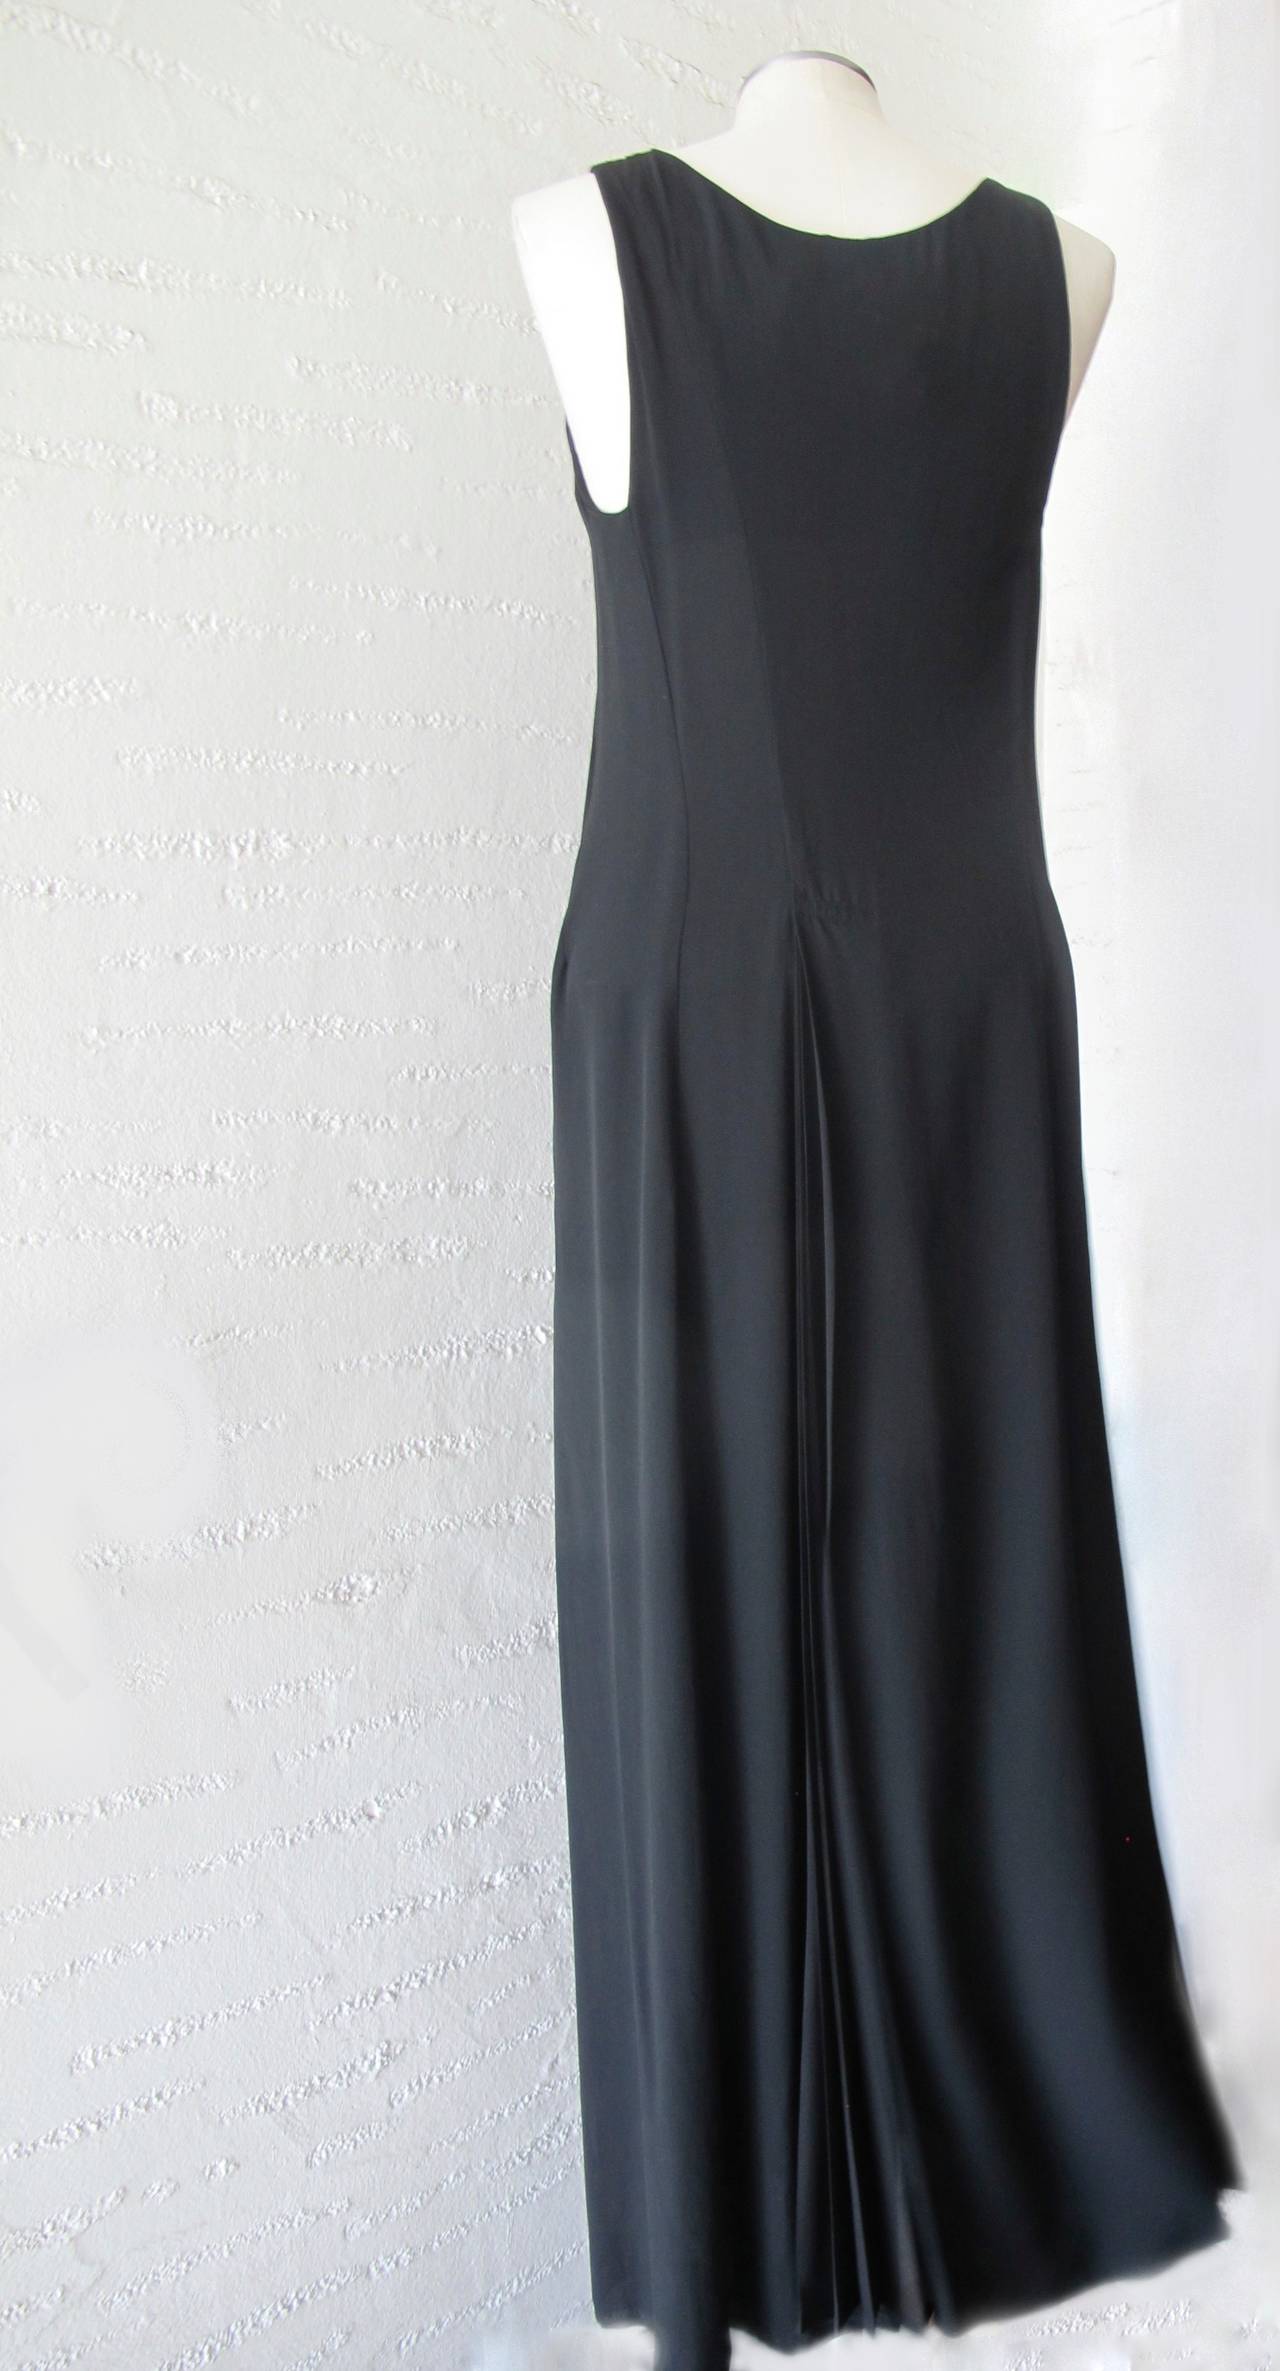 Elegant, sleeveless iconic Yohji Yamamoto long dress. There are 32 inch silk pleats in the back and in the front of the long black dress with two pockets at the hips. Donated by Wilkes Bashford, San Francisco with Wilkes Store Tag. Shoulder to